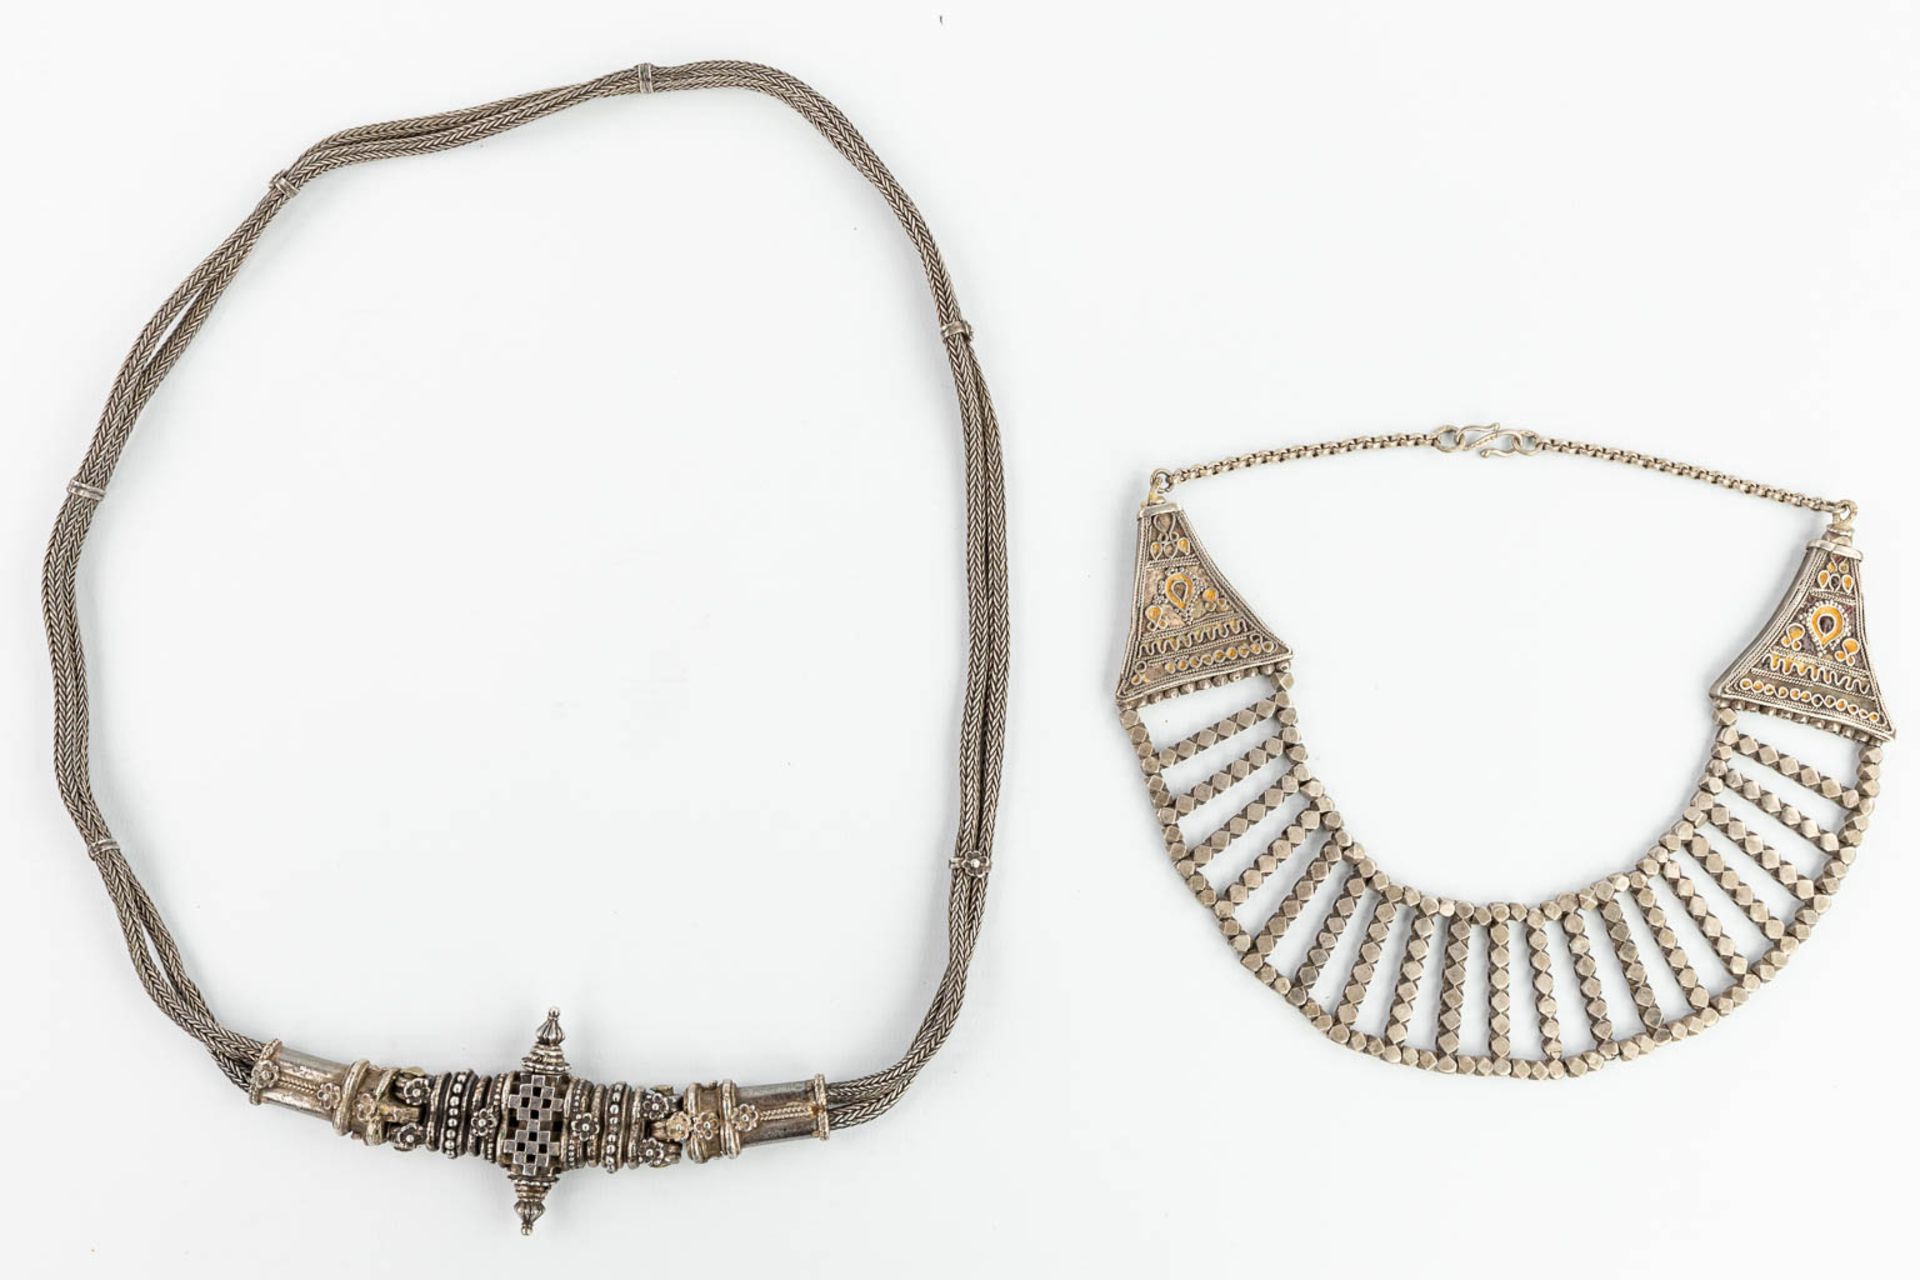 A necklace and belt made of silver in Oriental style. - Image 11 of 14